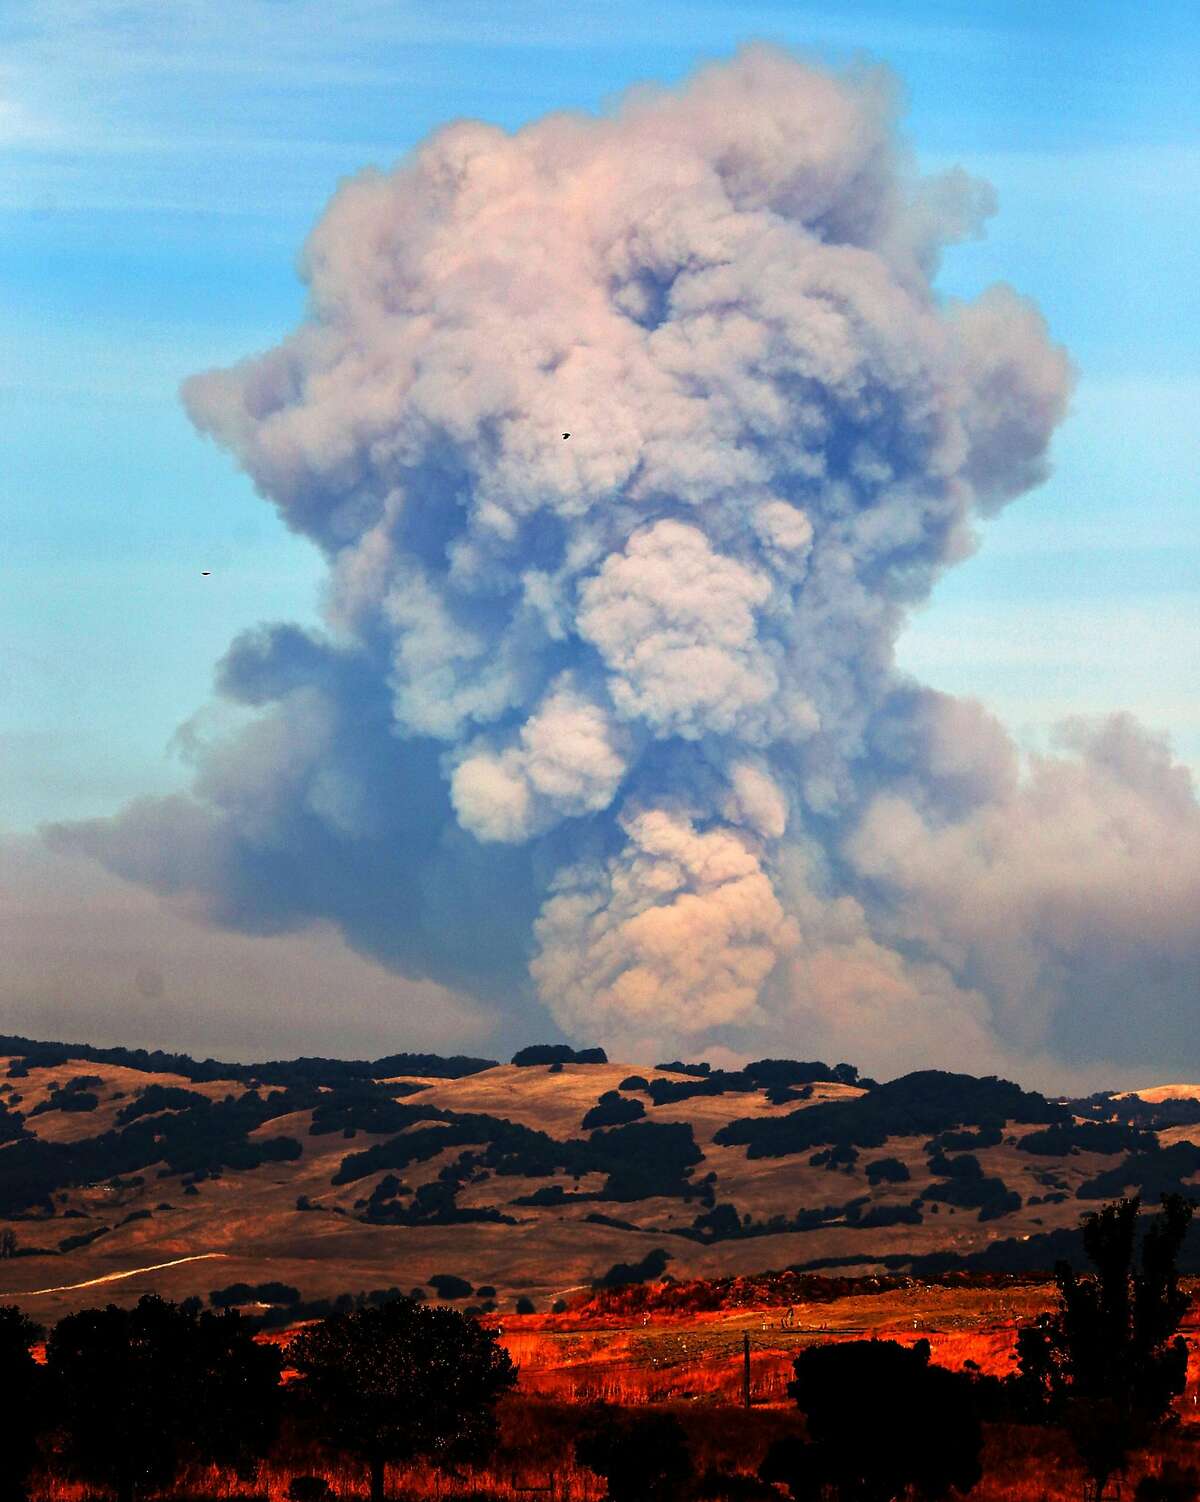 A large plume of smoke rises above the mountains between Napa and Sonoma, Calif., on Sunday, October 15, 2017.